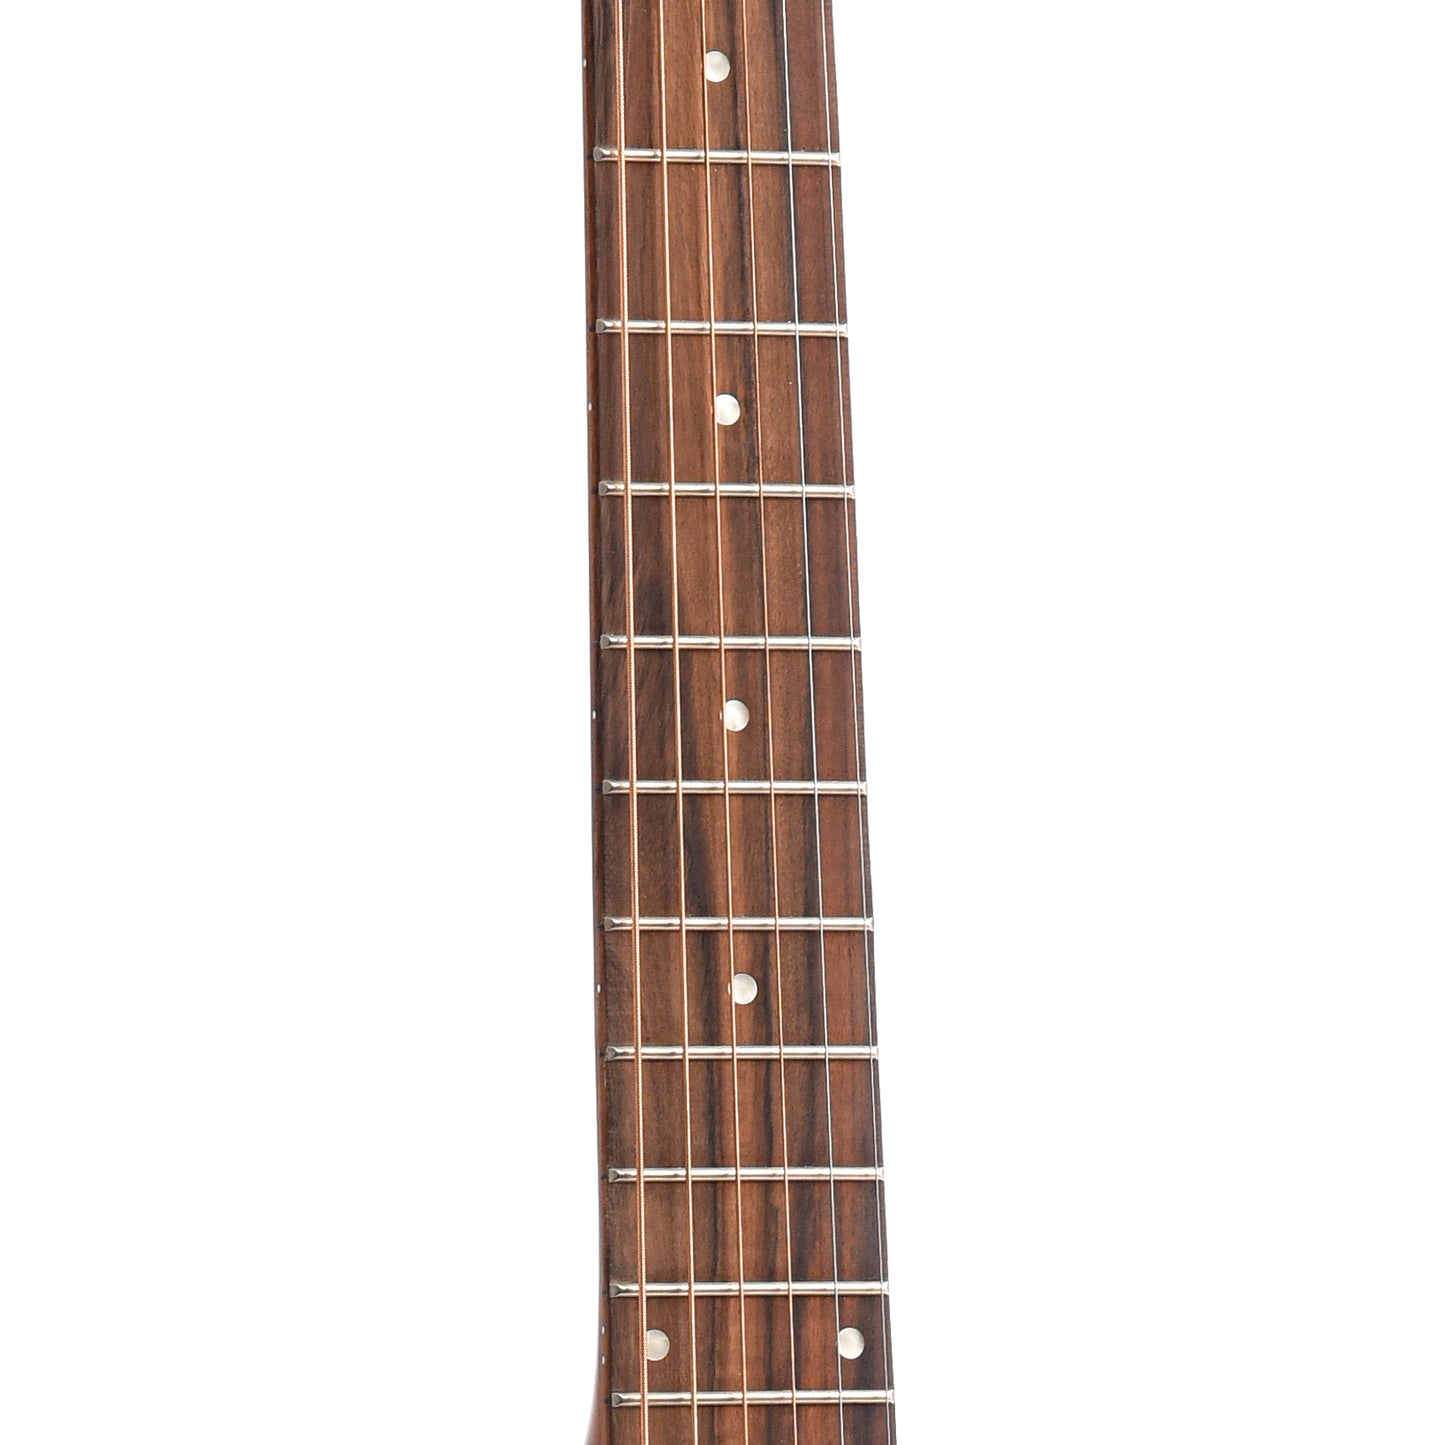 Fretboard of Farida Old Town Series OT-22 VBS Acoustic Guitar